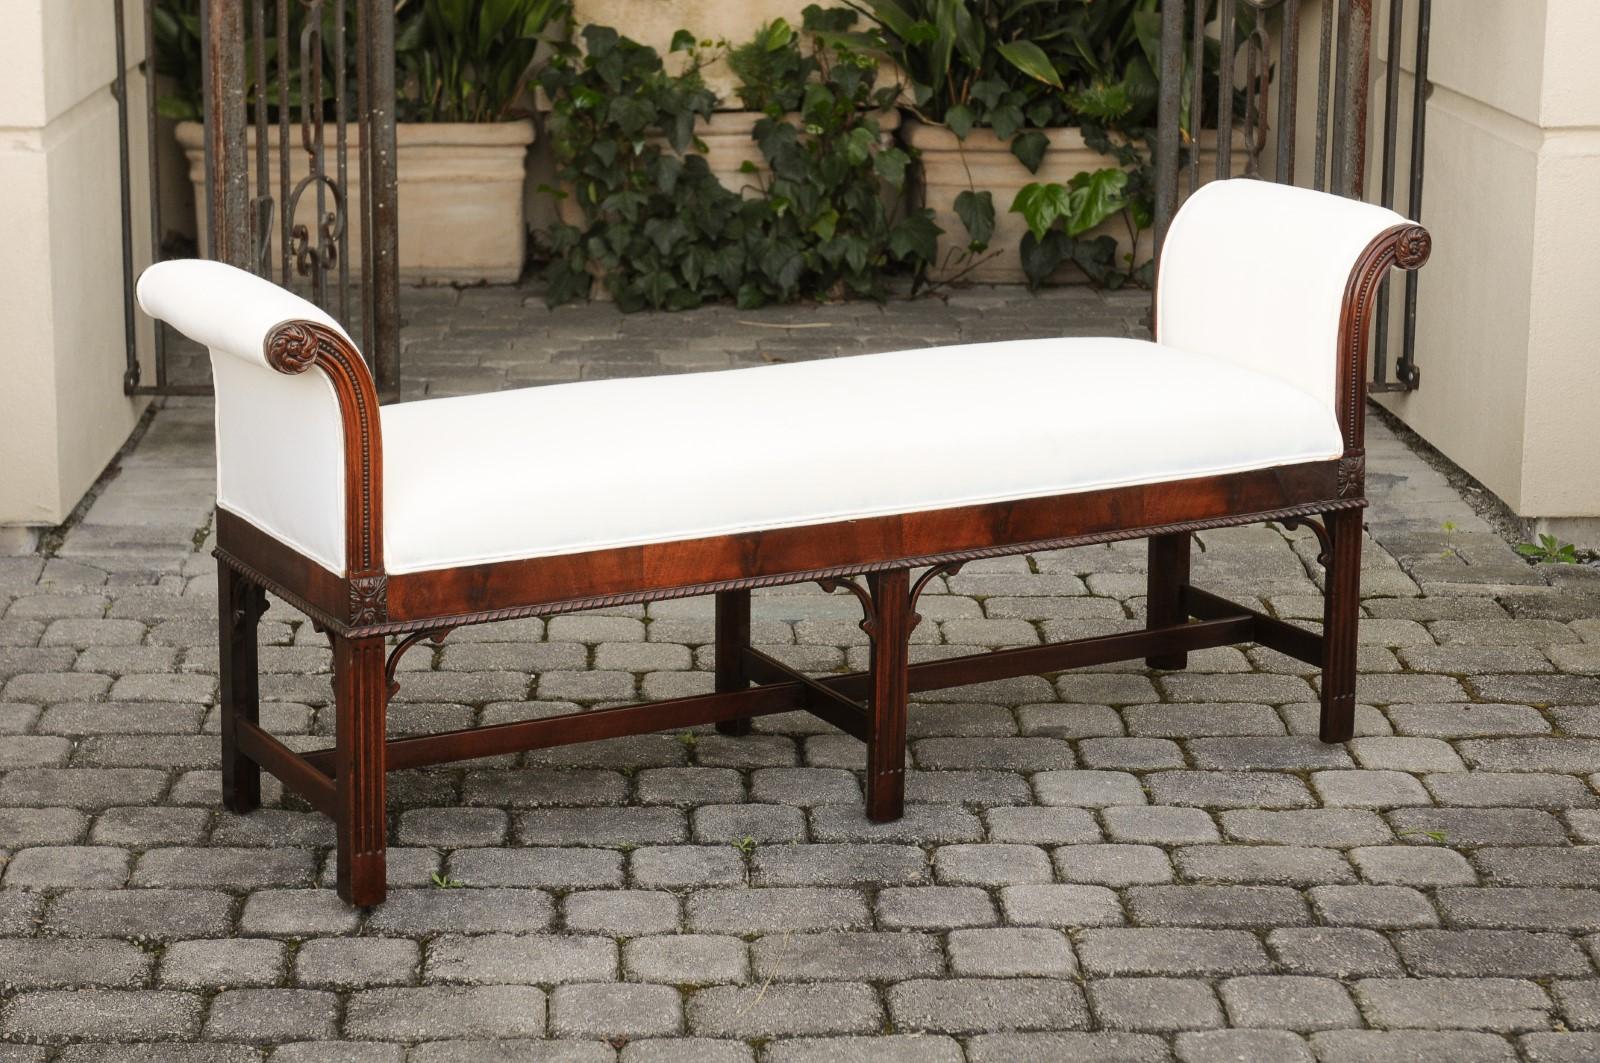 An English mahogany backless bench from the early 20th century, with out-scrolling arms, beaded and twisted motifs, carved rosettes and new upholstery. Born in England during the first half of the 20th century, this backless bench features a long